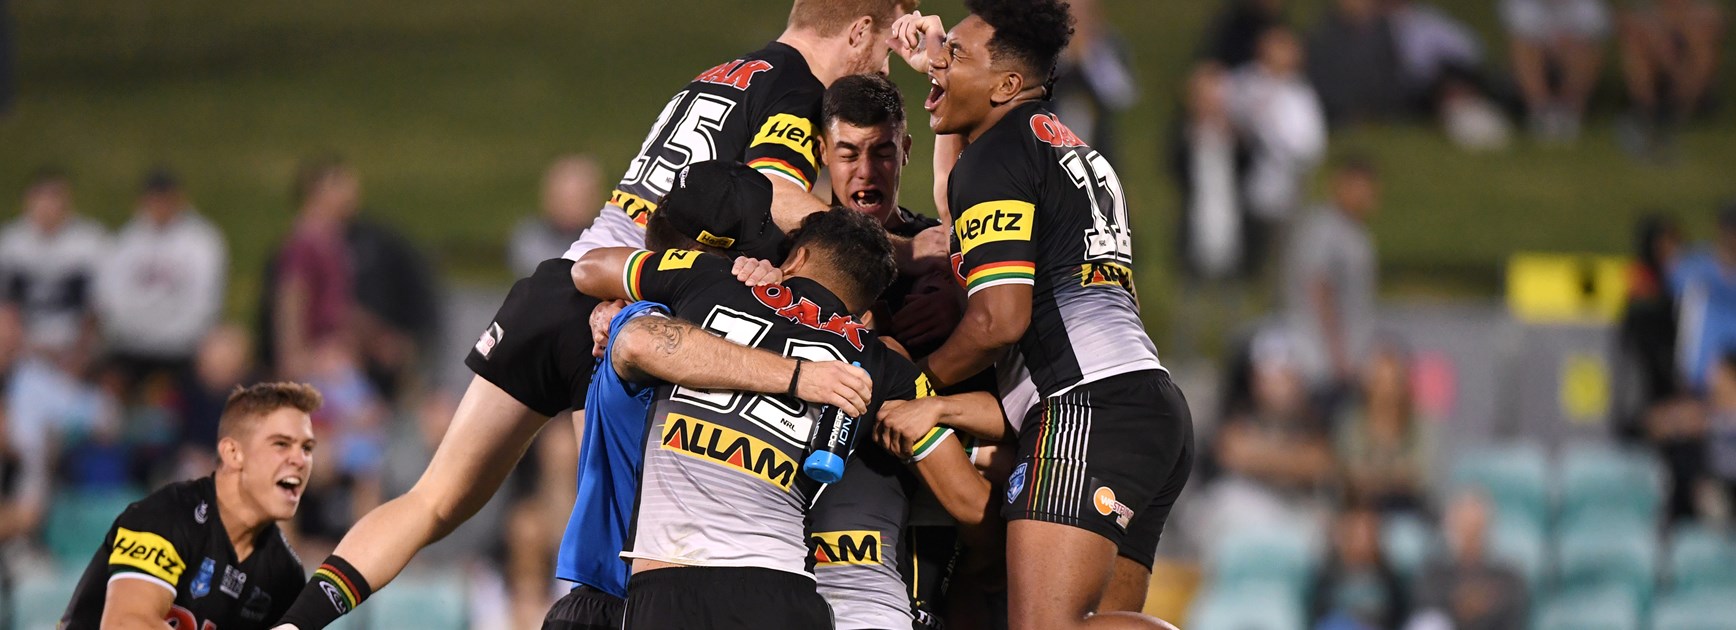 WATCH: National Under-18s Final – Penrith v Souths Logan